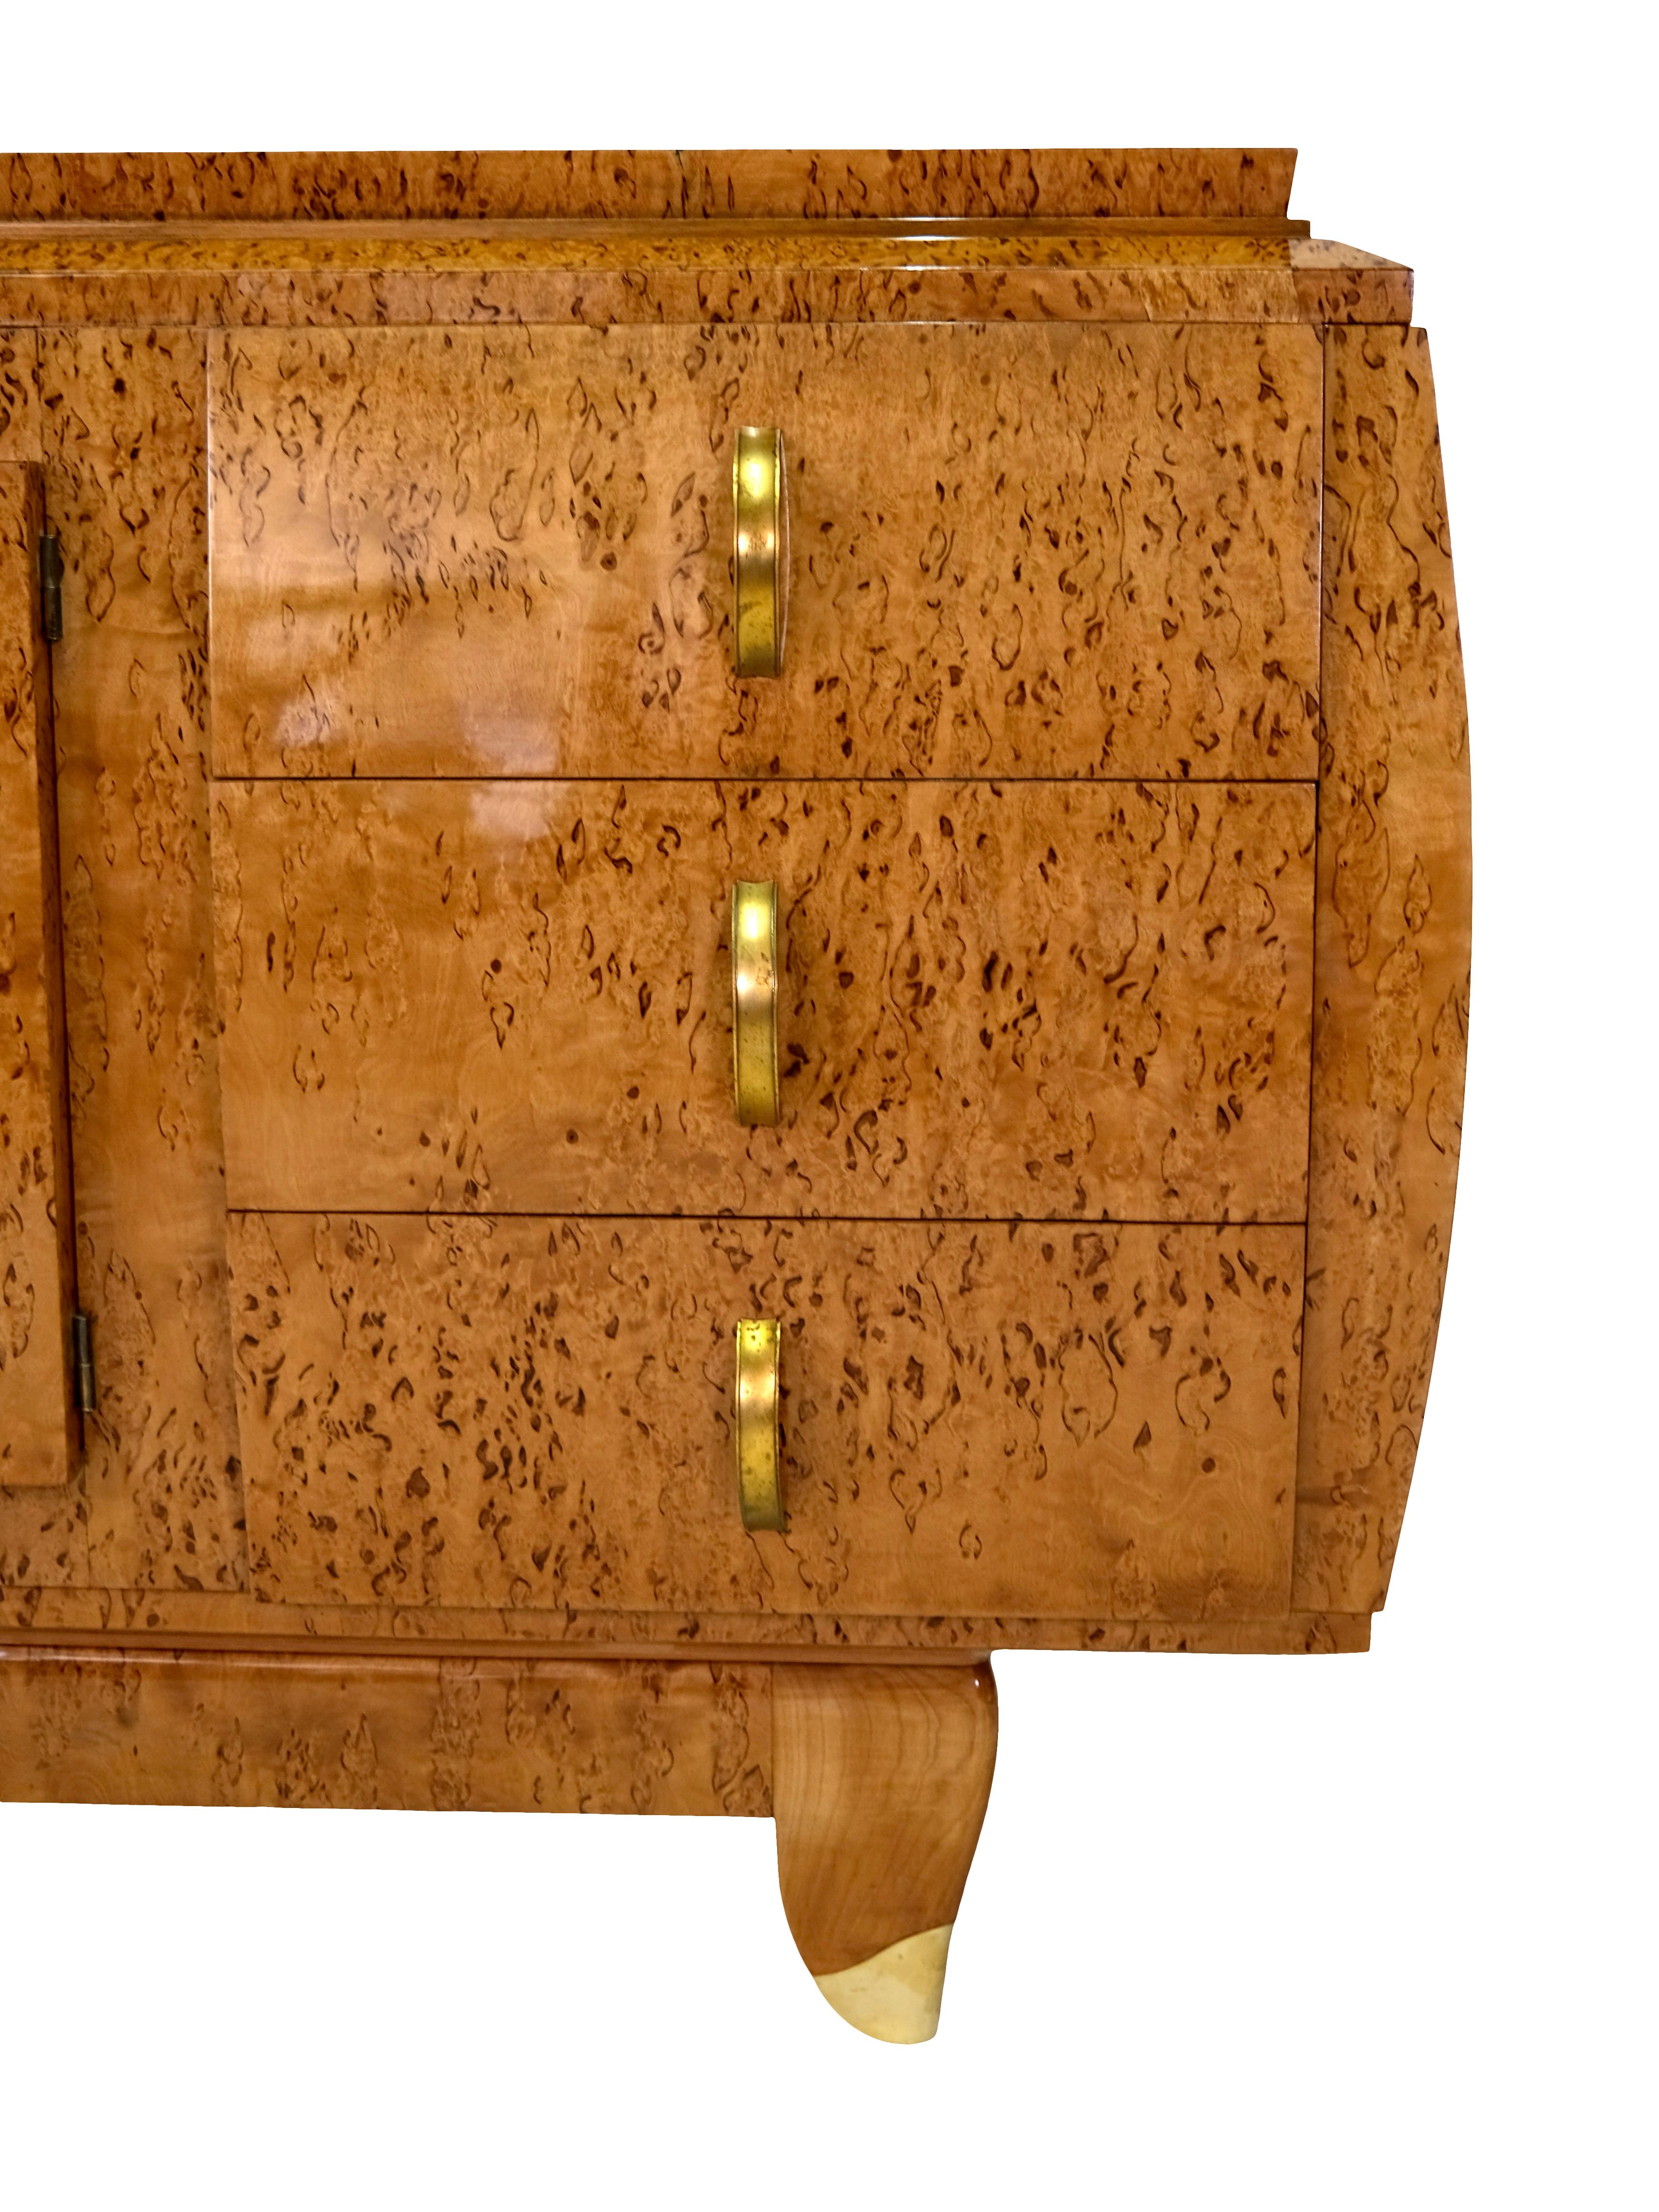 Curved hand polished Art Deco Sideboard in Birch Burl Wood with Brass Fittings For Sale 3